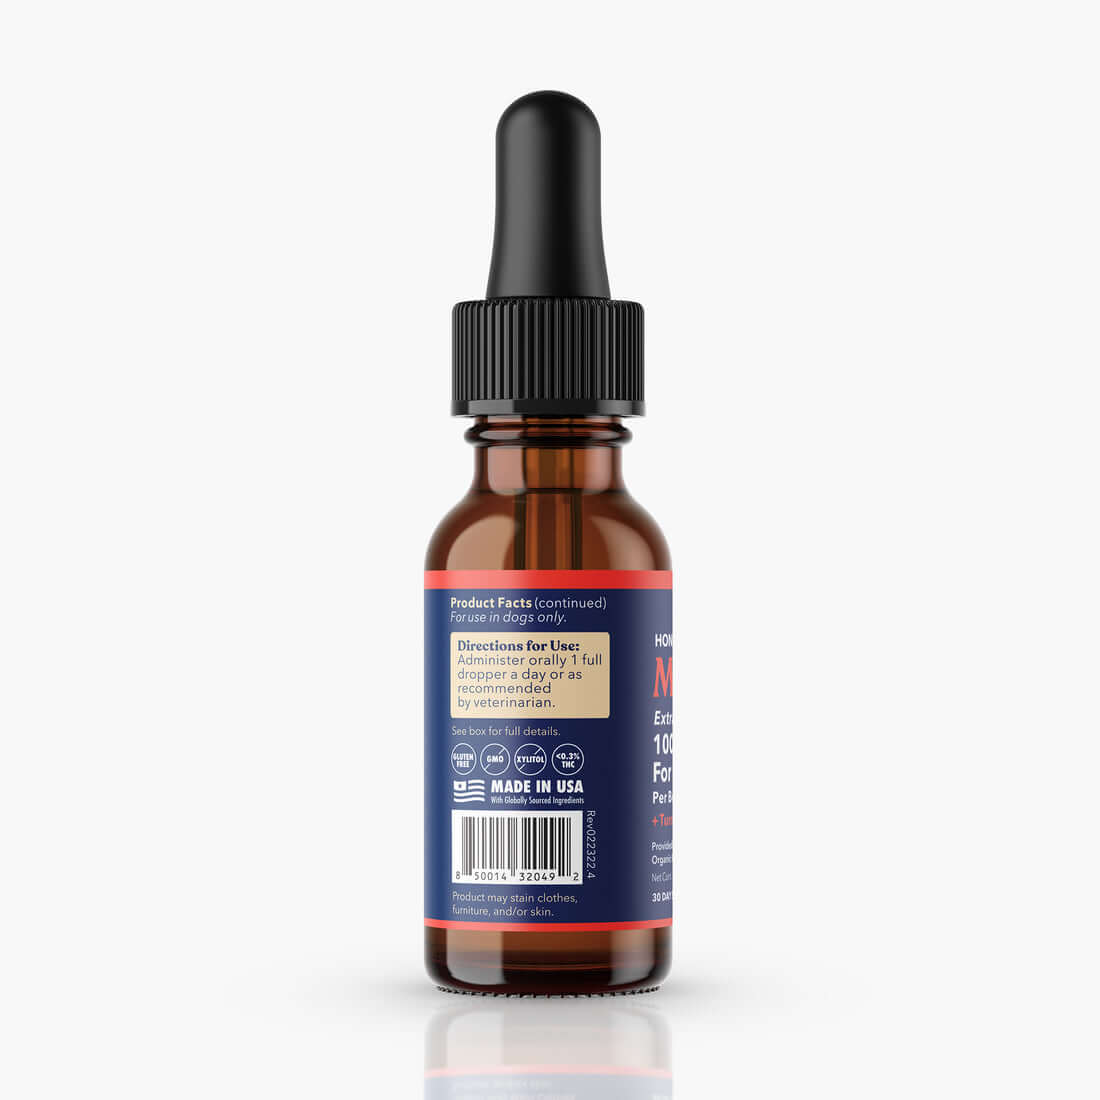 Extra Strength CBD Oil for Dogs - Mobility image_2